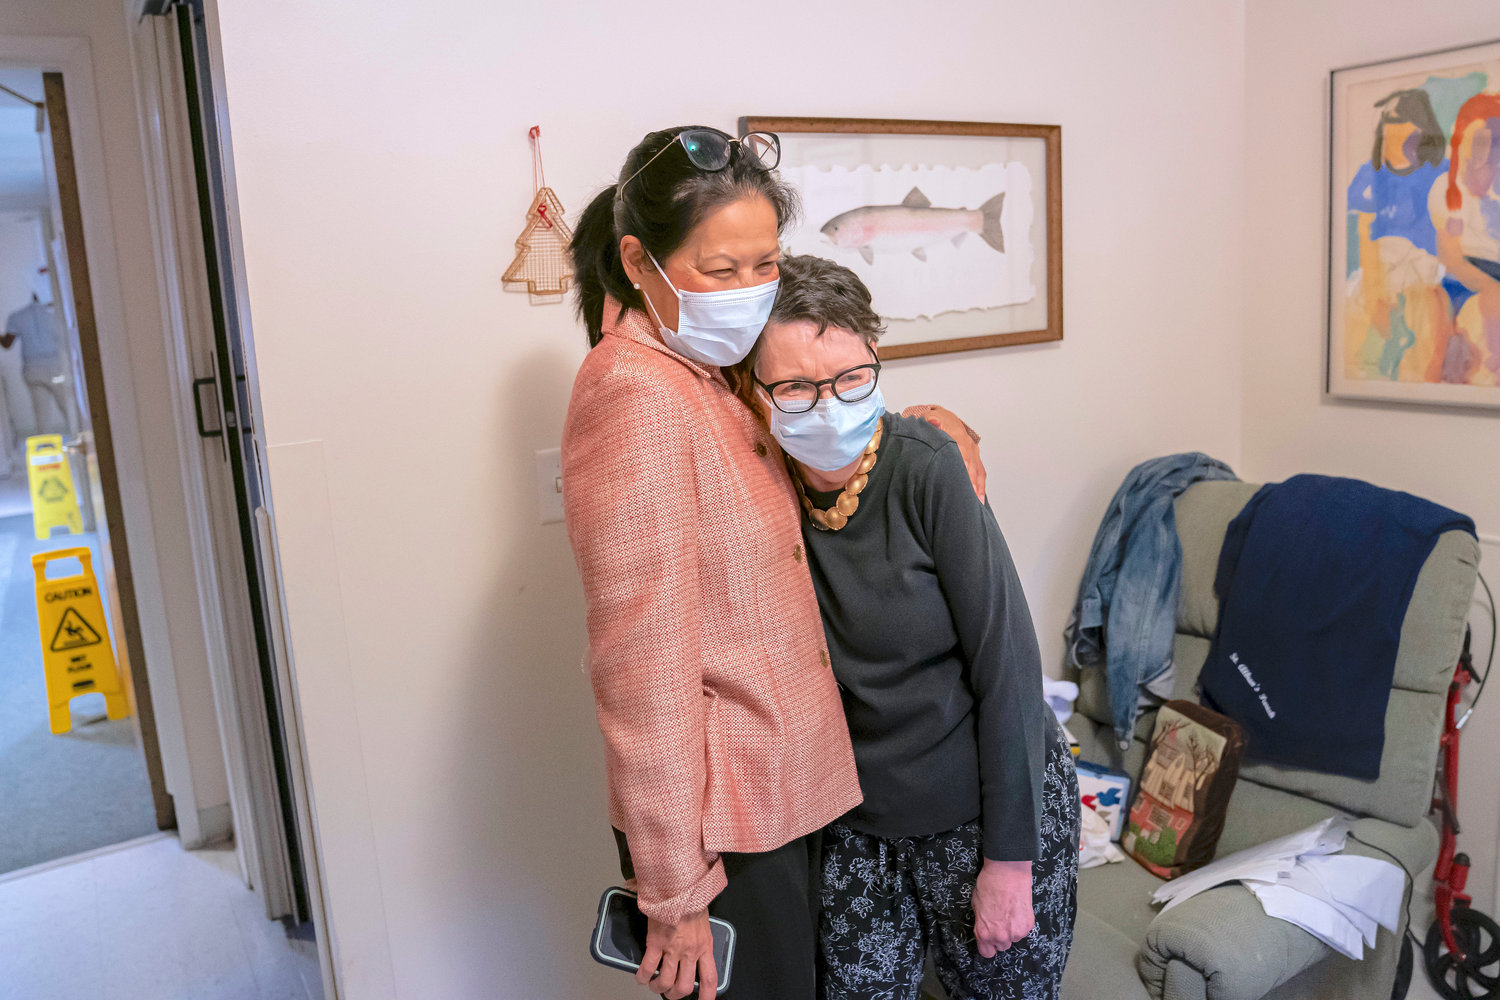 Tina Sandri, CEO of Forest Hills of DC senior living facility, left, hugs resident Courty Andrews after helping Andrews back to her room on Thursday, Dec. 8, in Washington.